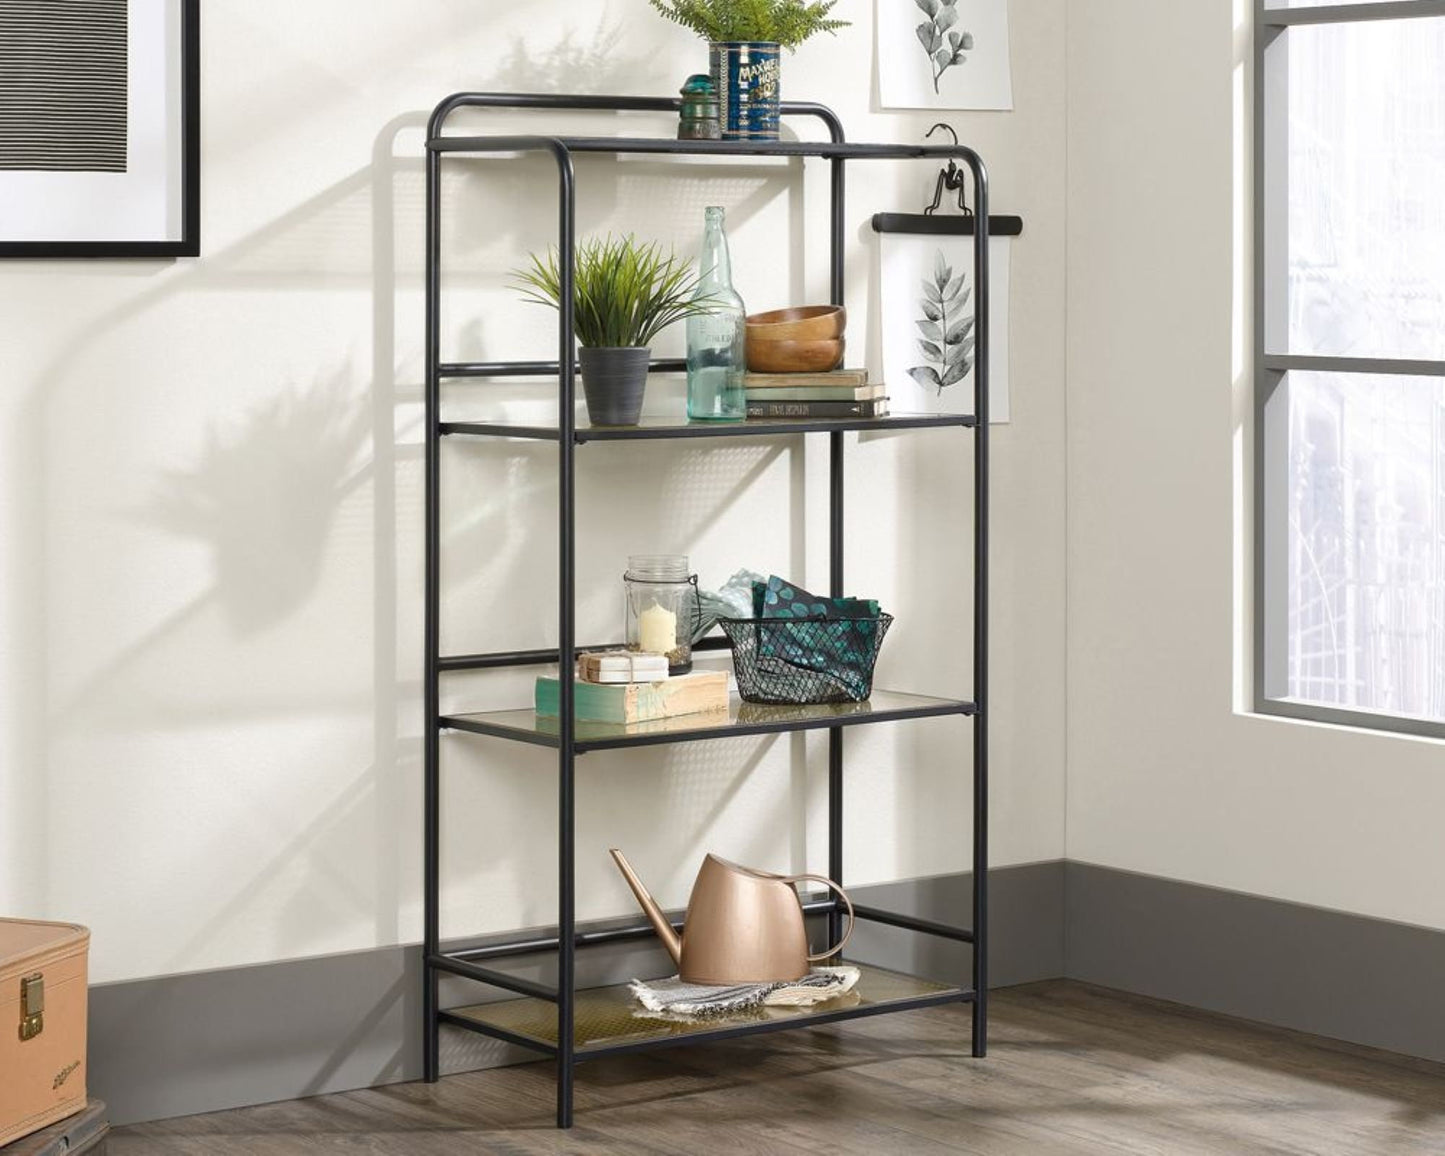 Contemporary / retro rectangular display unit / bookcase - metal and glass